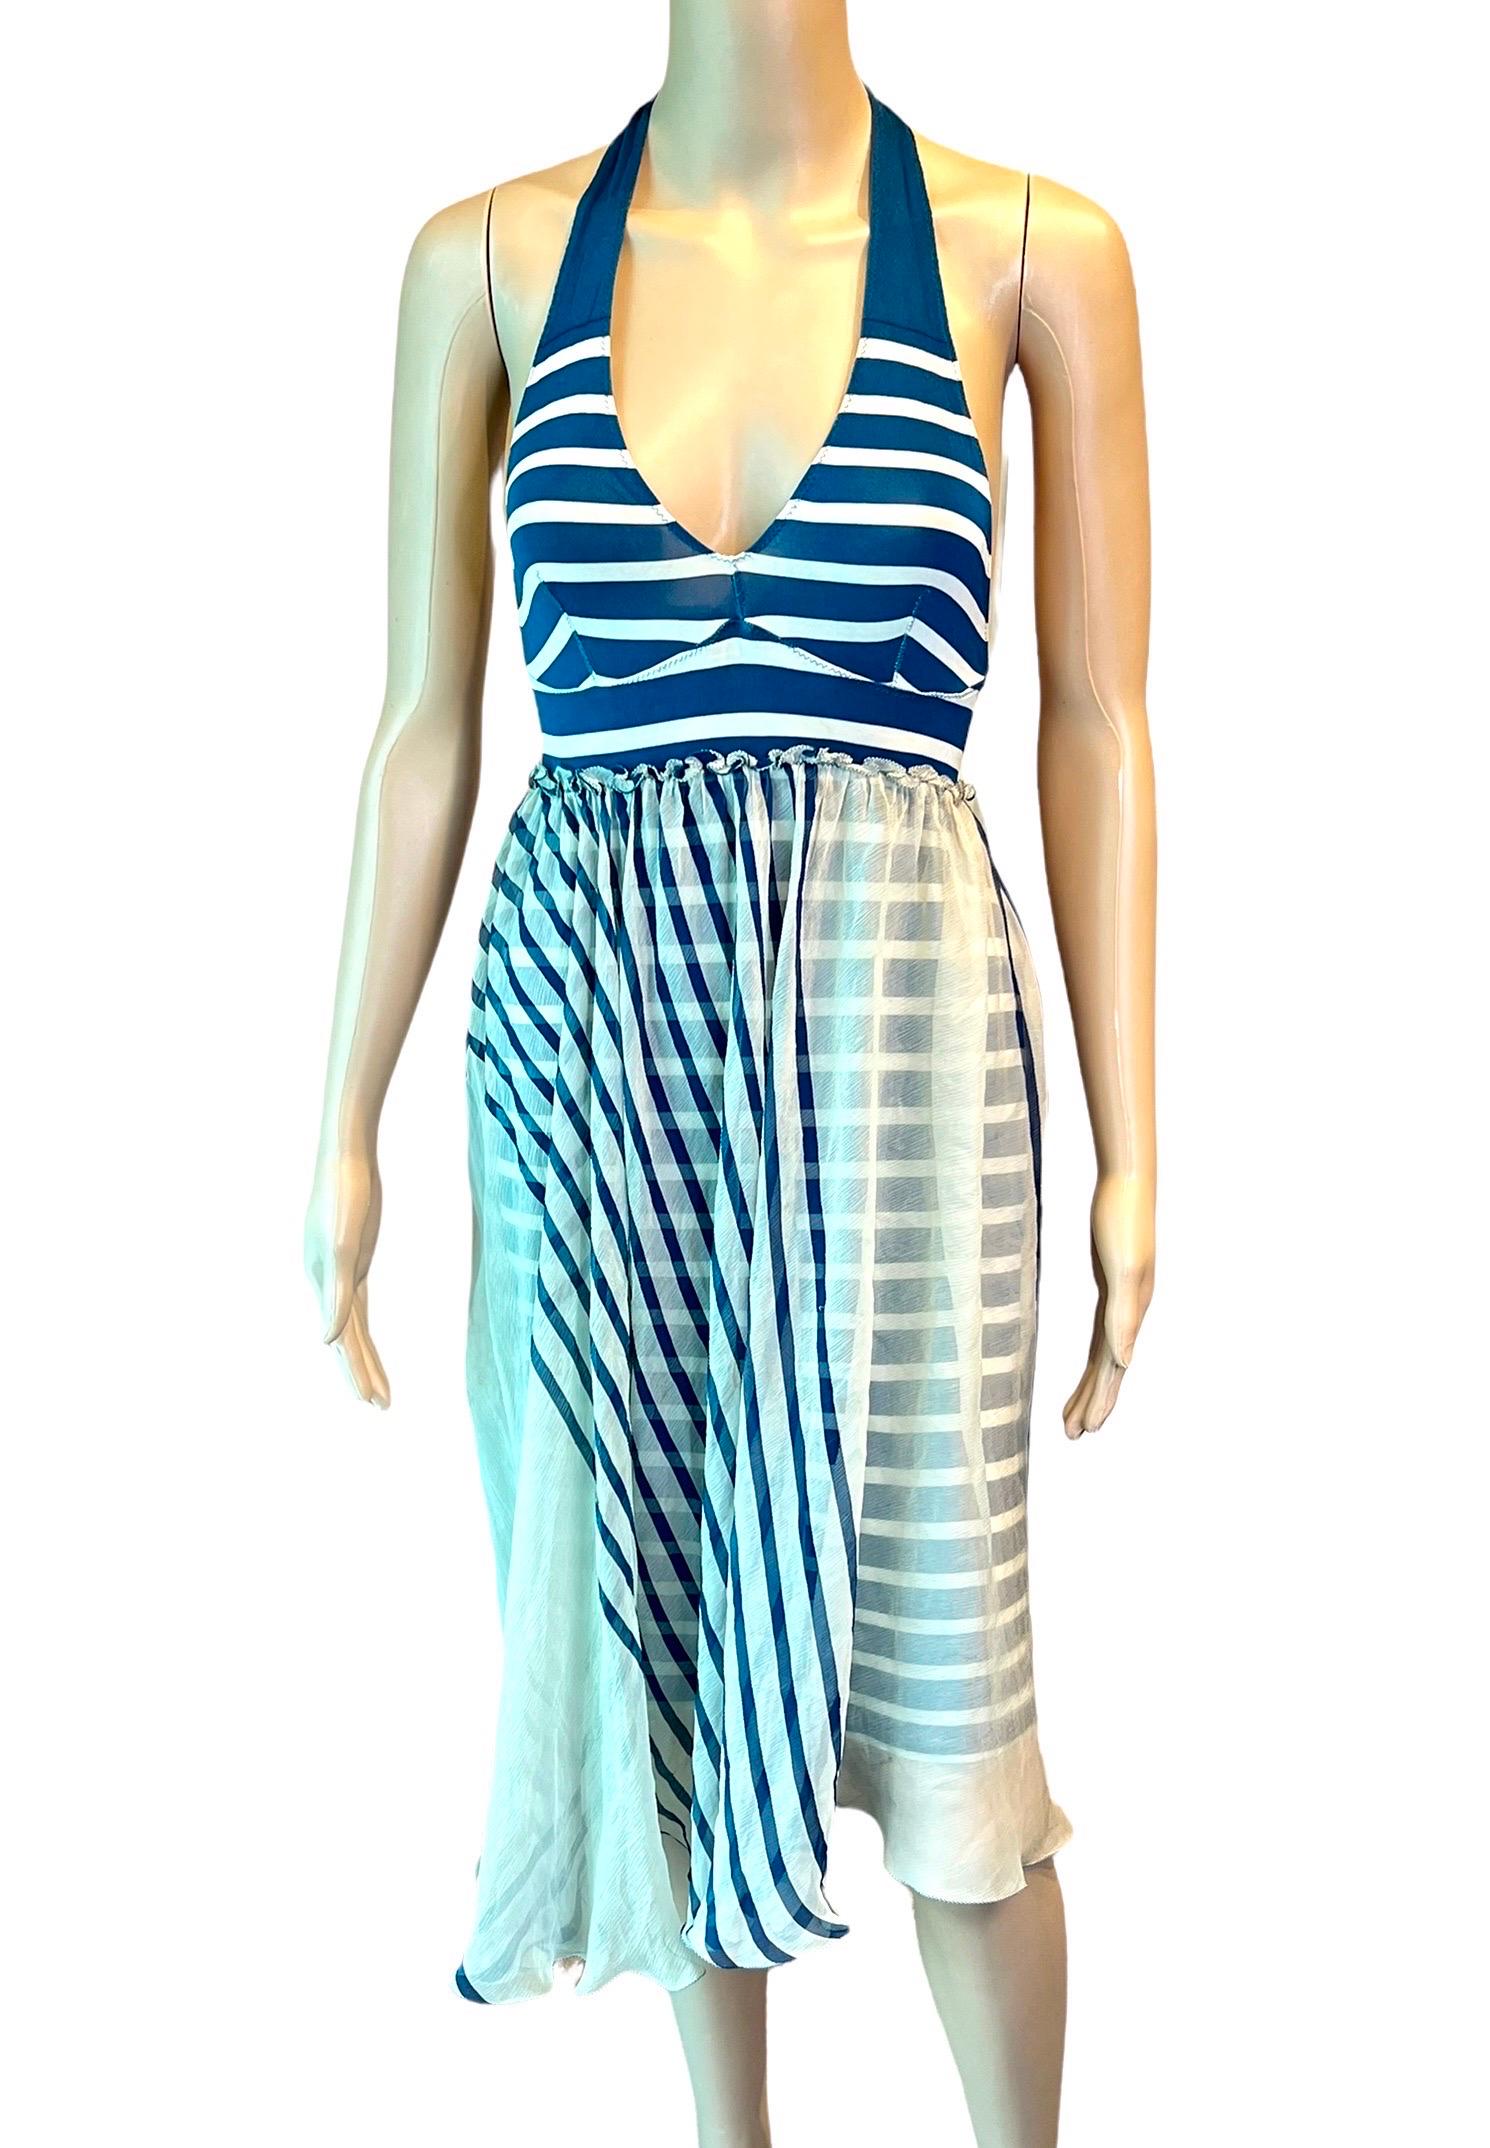 Jean Paul Gaultier Soleil S/S 2001 Striped Ivory and Navy Blue Print Cutout Back Dress Size L


